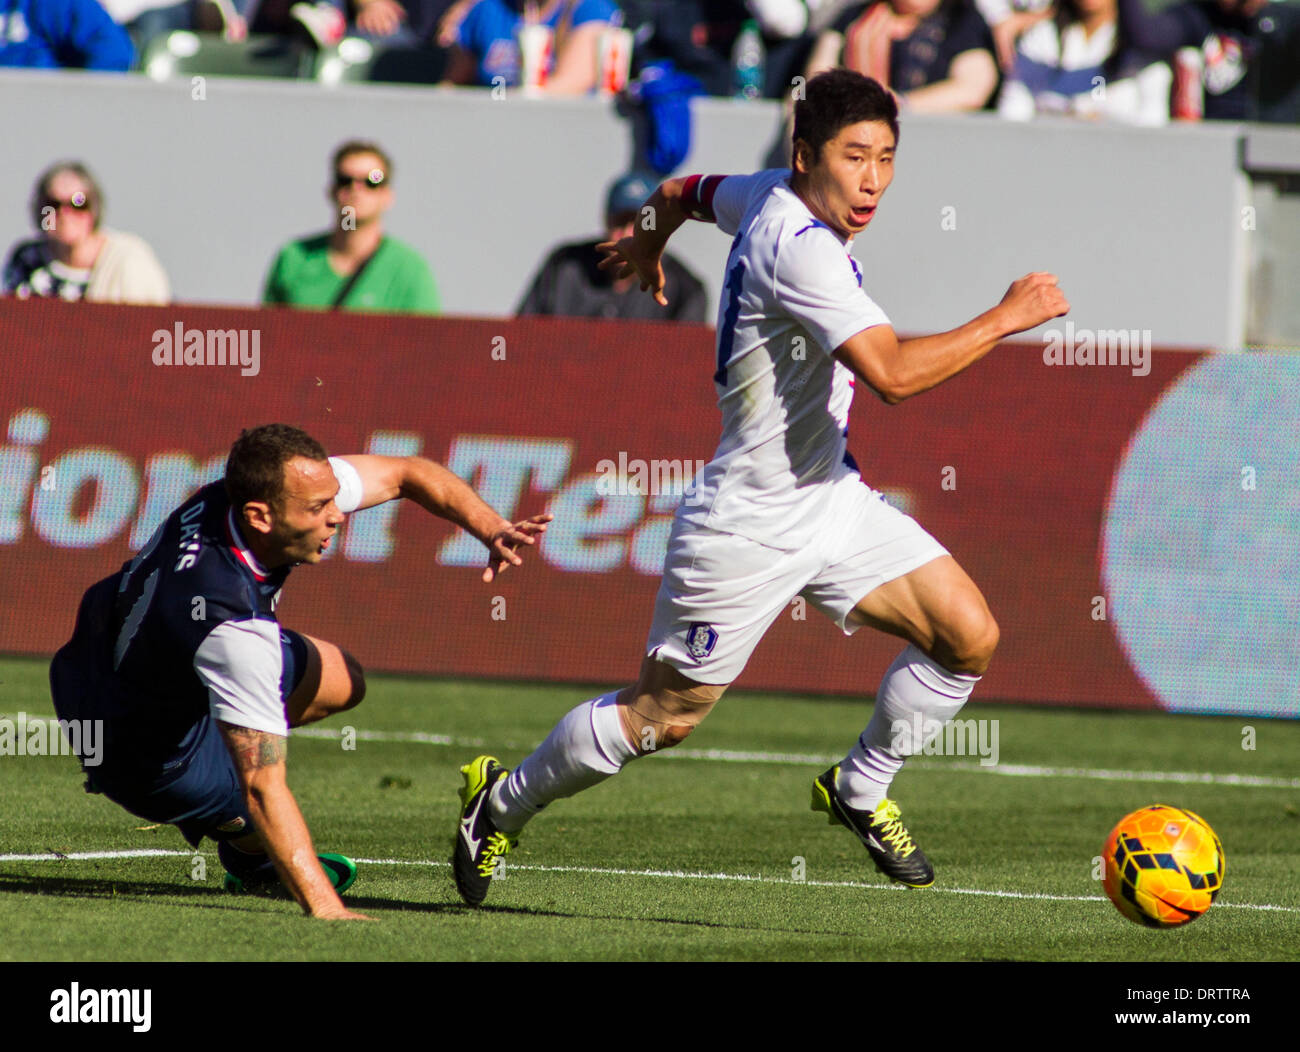 (140202) -- CARSON , Feb. 2, 2014 (Xinhua) -- Lee Keun-Ho (R) of South Korea breaks through during a friendly football match against the United States in preparation of the FIFA 2014 World Cup, at StubHub Center on Feb. 1, 2014 in Carson, California. U.S. won the match 2-0. (Xinhua/Zhao Hanrong) Stock Photo